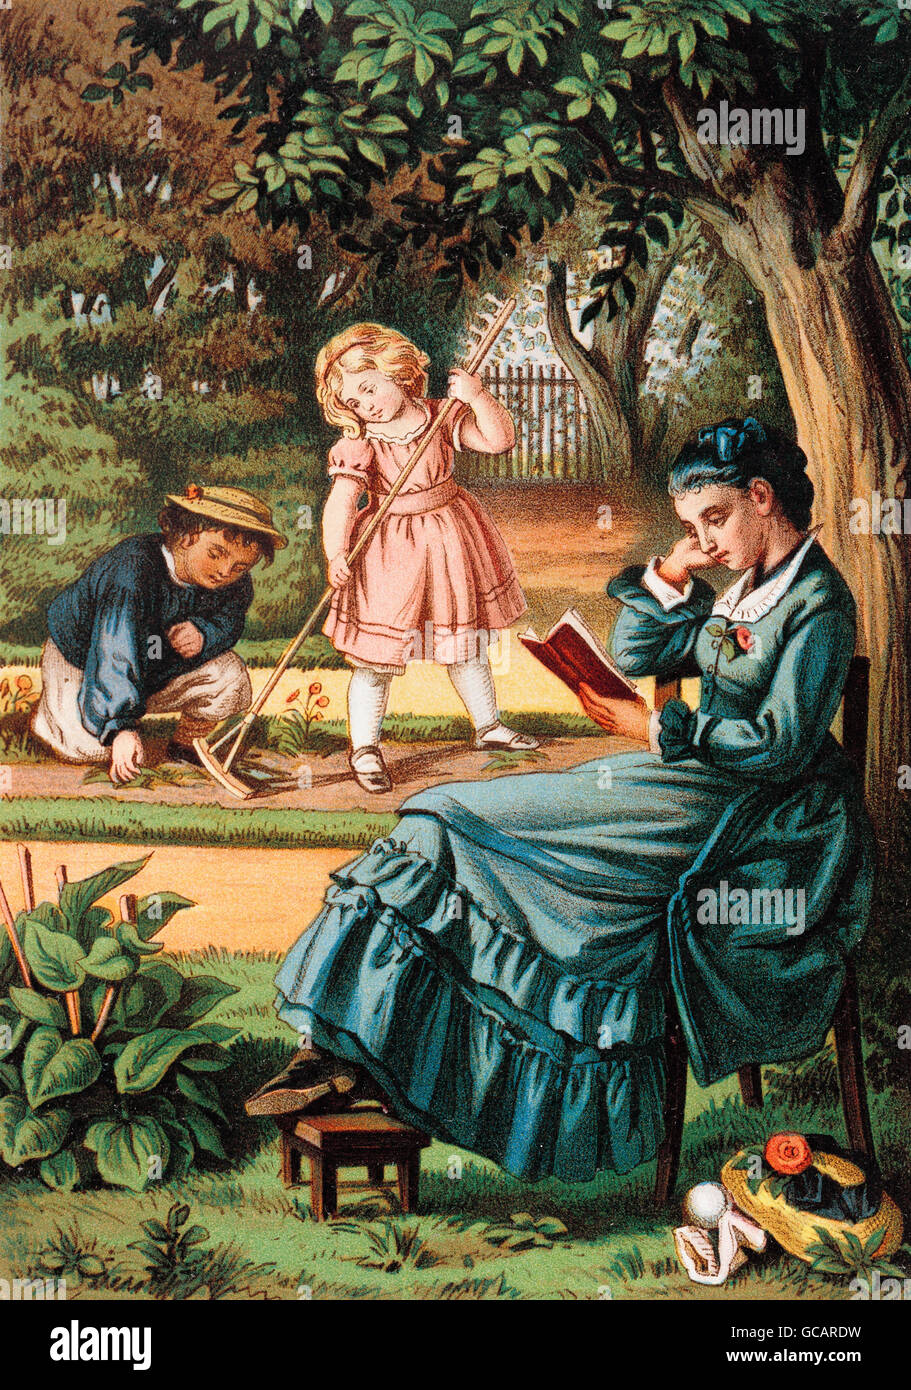 literature, children's book 'Töchter-Album', story: 'Den Fehler sühnen' (atoning a mistake) by A. Carolis, illustration by Fanny Bürkner, published by Thekla von Gumpert, Glogau, 1875, Additional-Rights-Clearences-Not Available Stock Photo